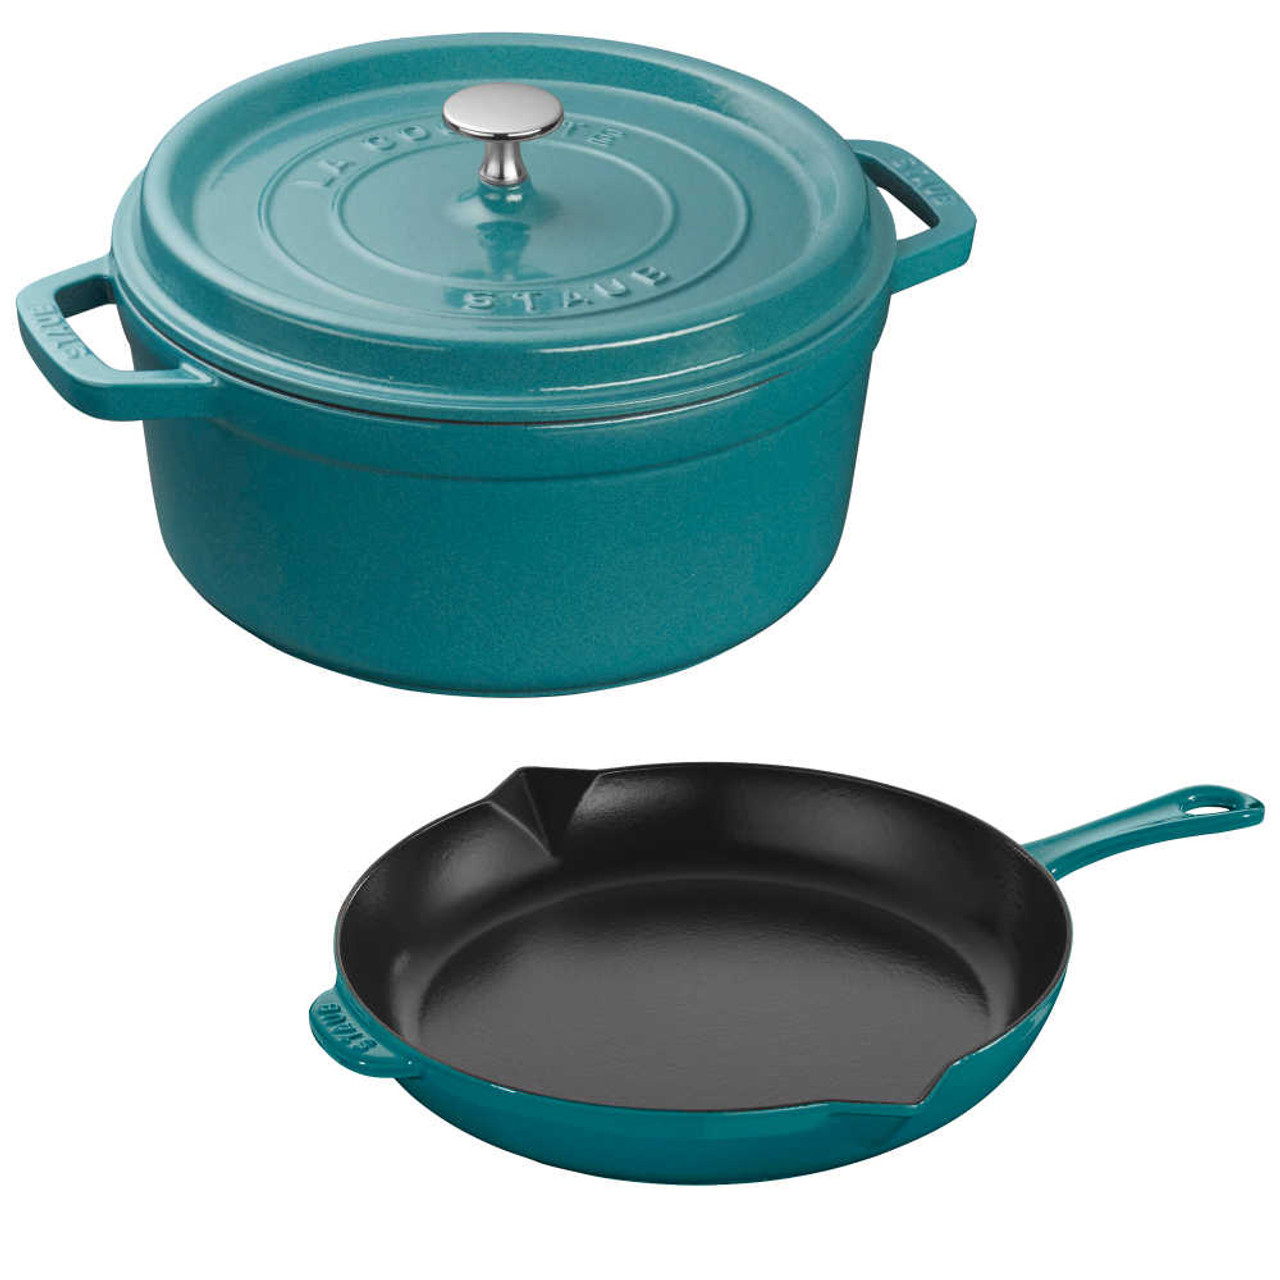 https://cdn11.bigcommerce.com/s-hccytny0od/images/stencil/1280x1280/products/5791/25735/Staub_Cast_Iron_Cocotte_and_Fry_Pan_Set_Turquoise__00418.1696526577.jpg?c=2?imbypass=on